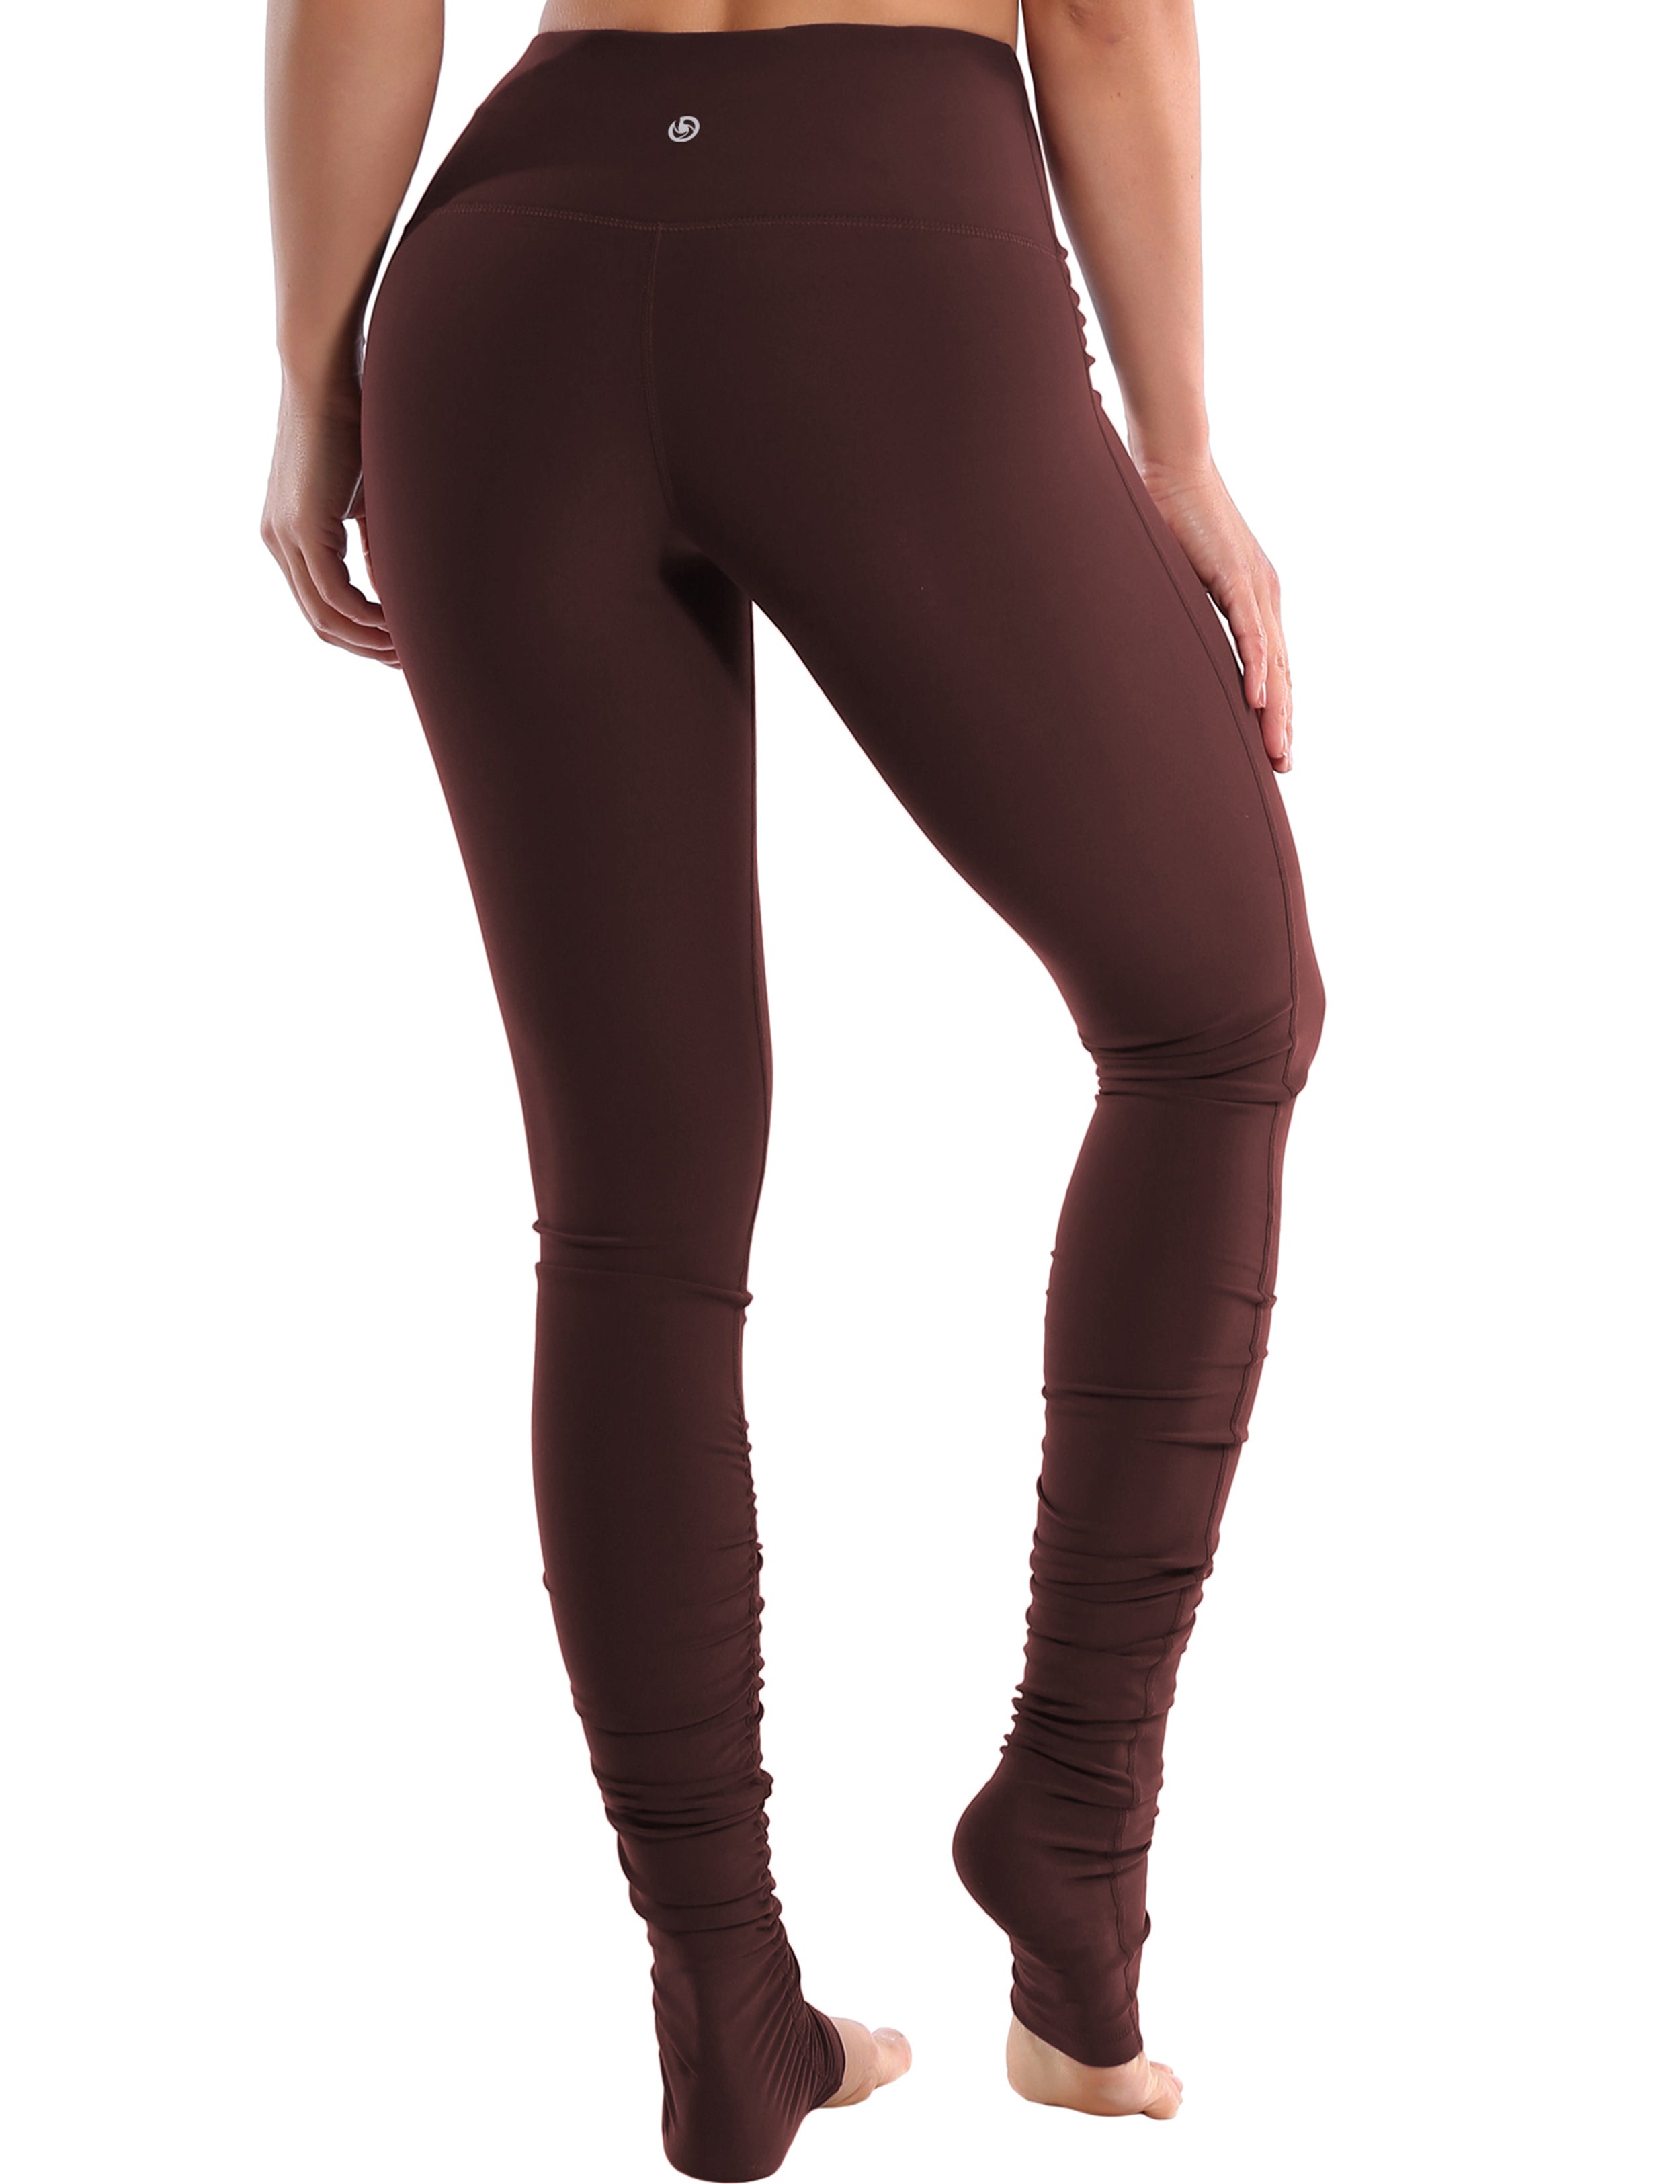 Over the Heel Jogging Pants mahoganymaroon Over the Heel Design 87%Nylon/13%Spandex Fabric doesn't attract lint easily 4-way stretch No see-through Moisture-wicking Tummy control